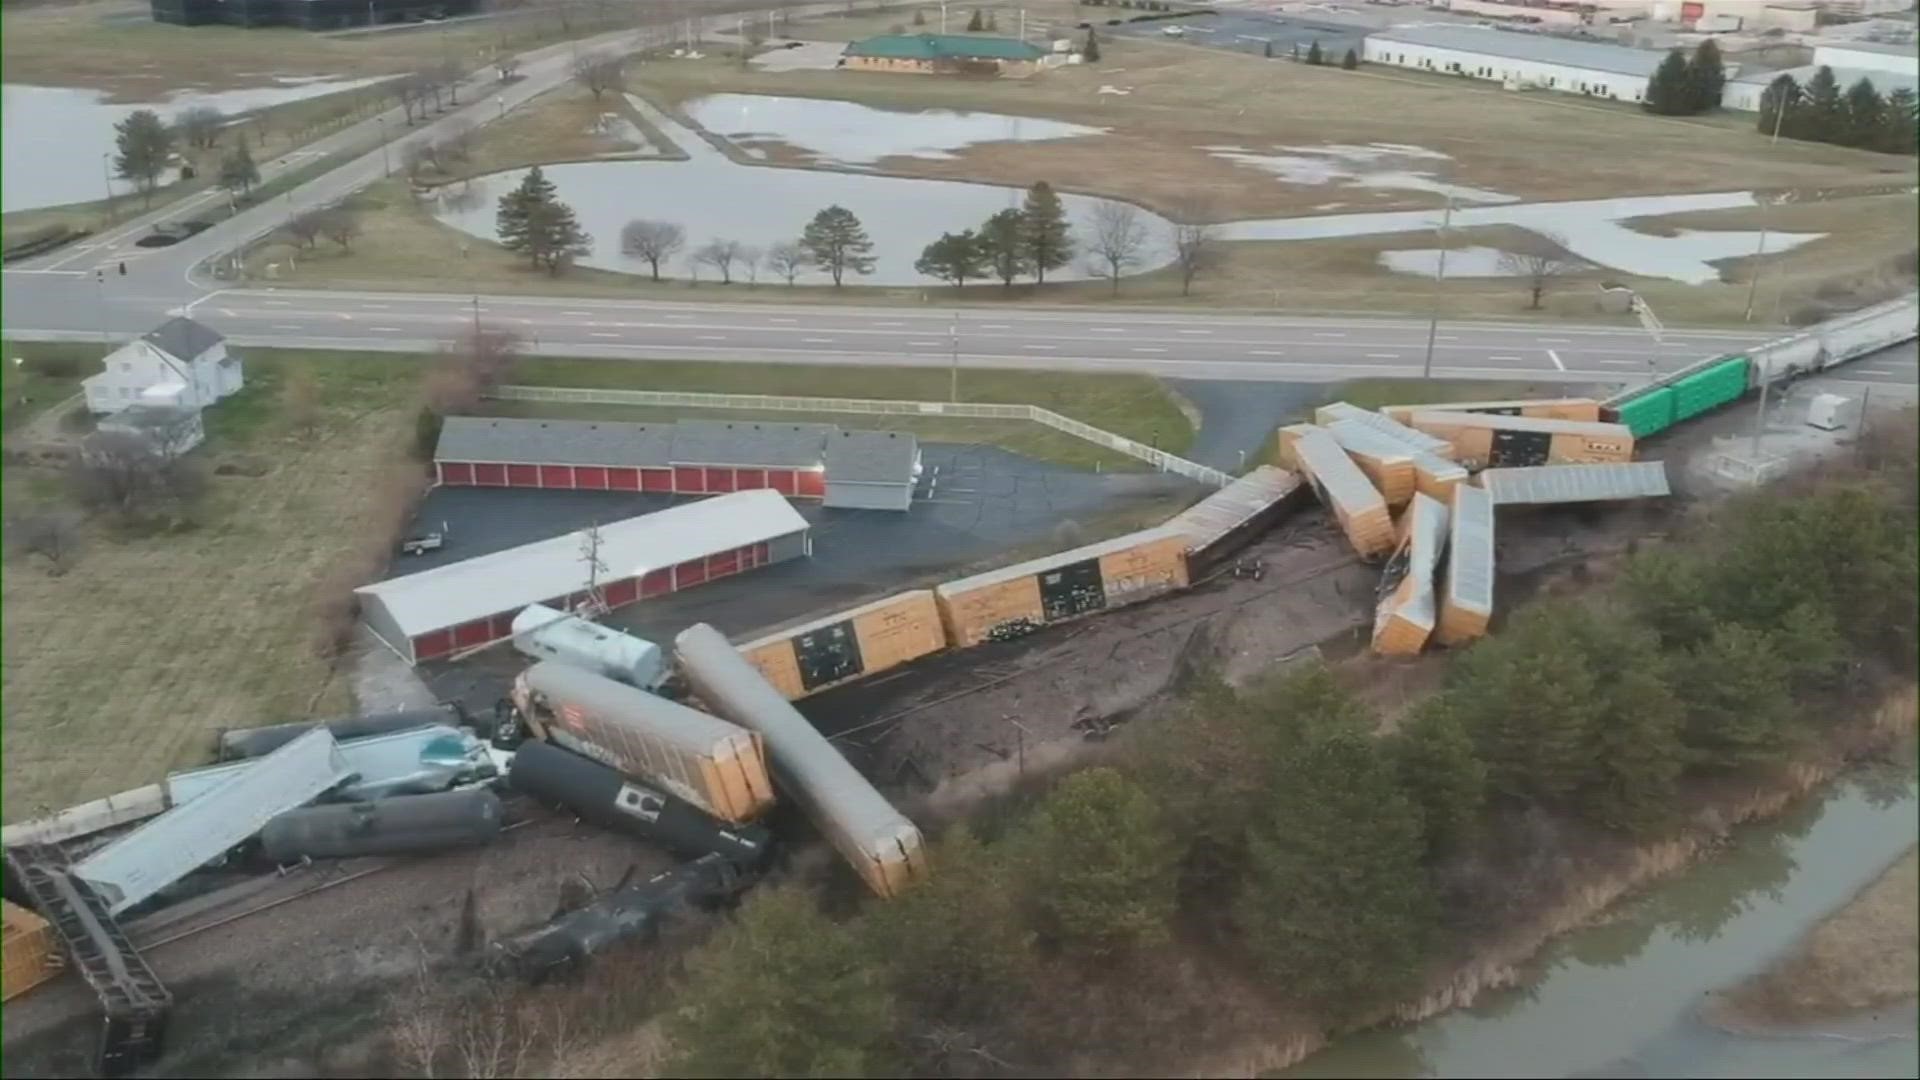 Shelter-in-place order lifted after second Ohio train derailment (dayton247now.com)